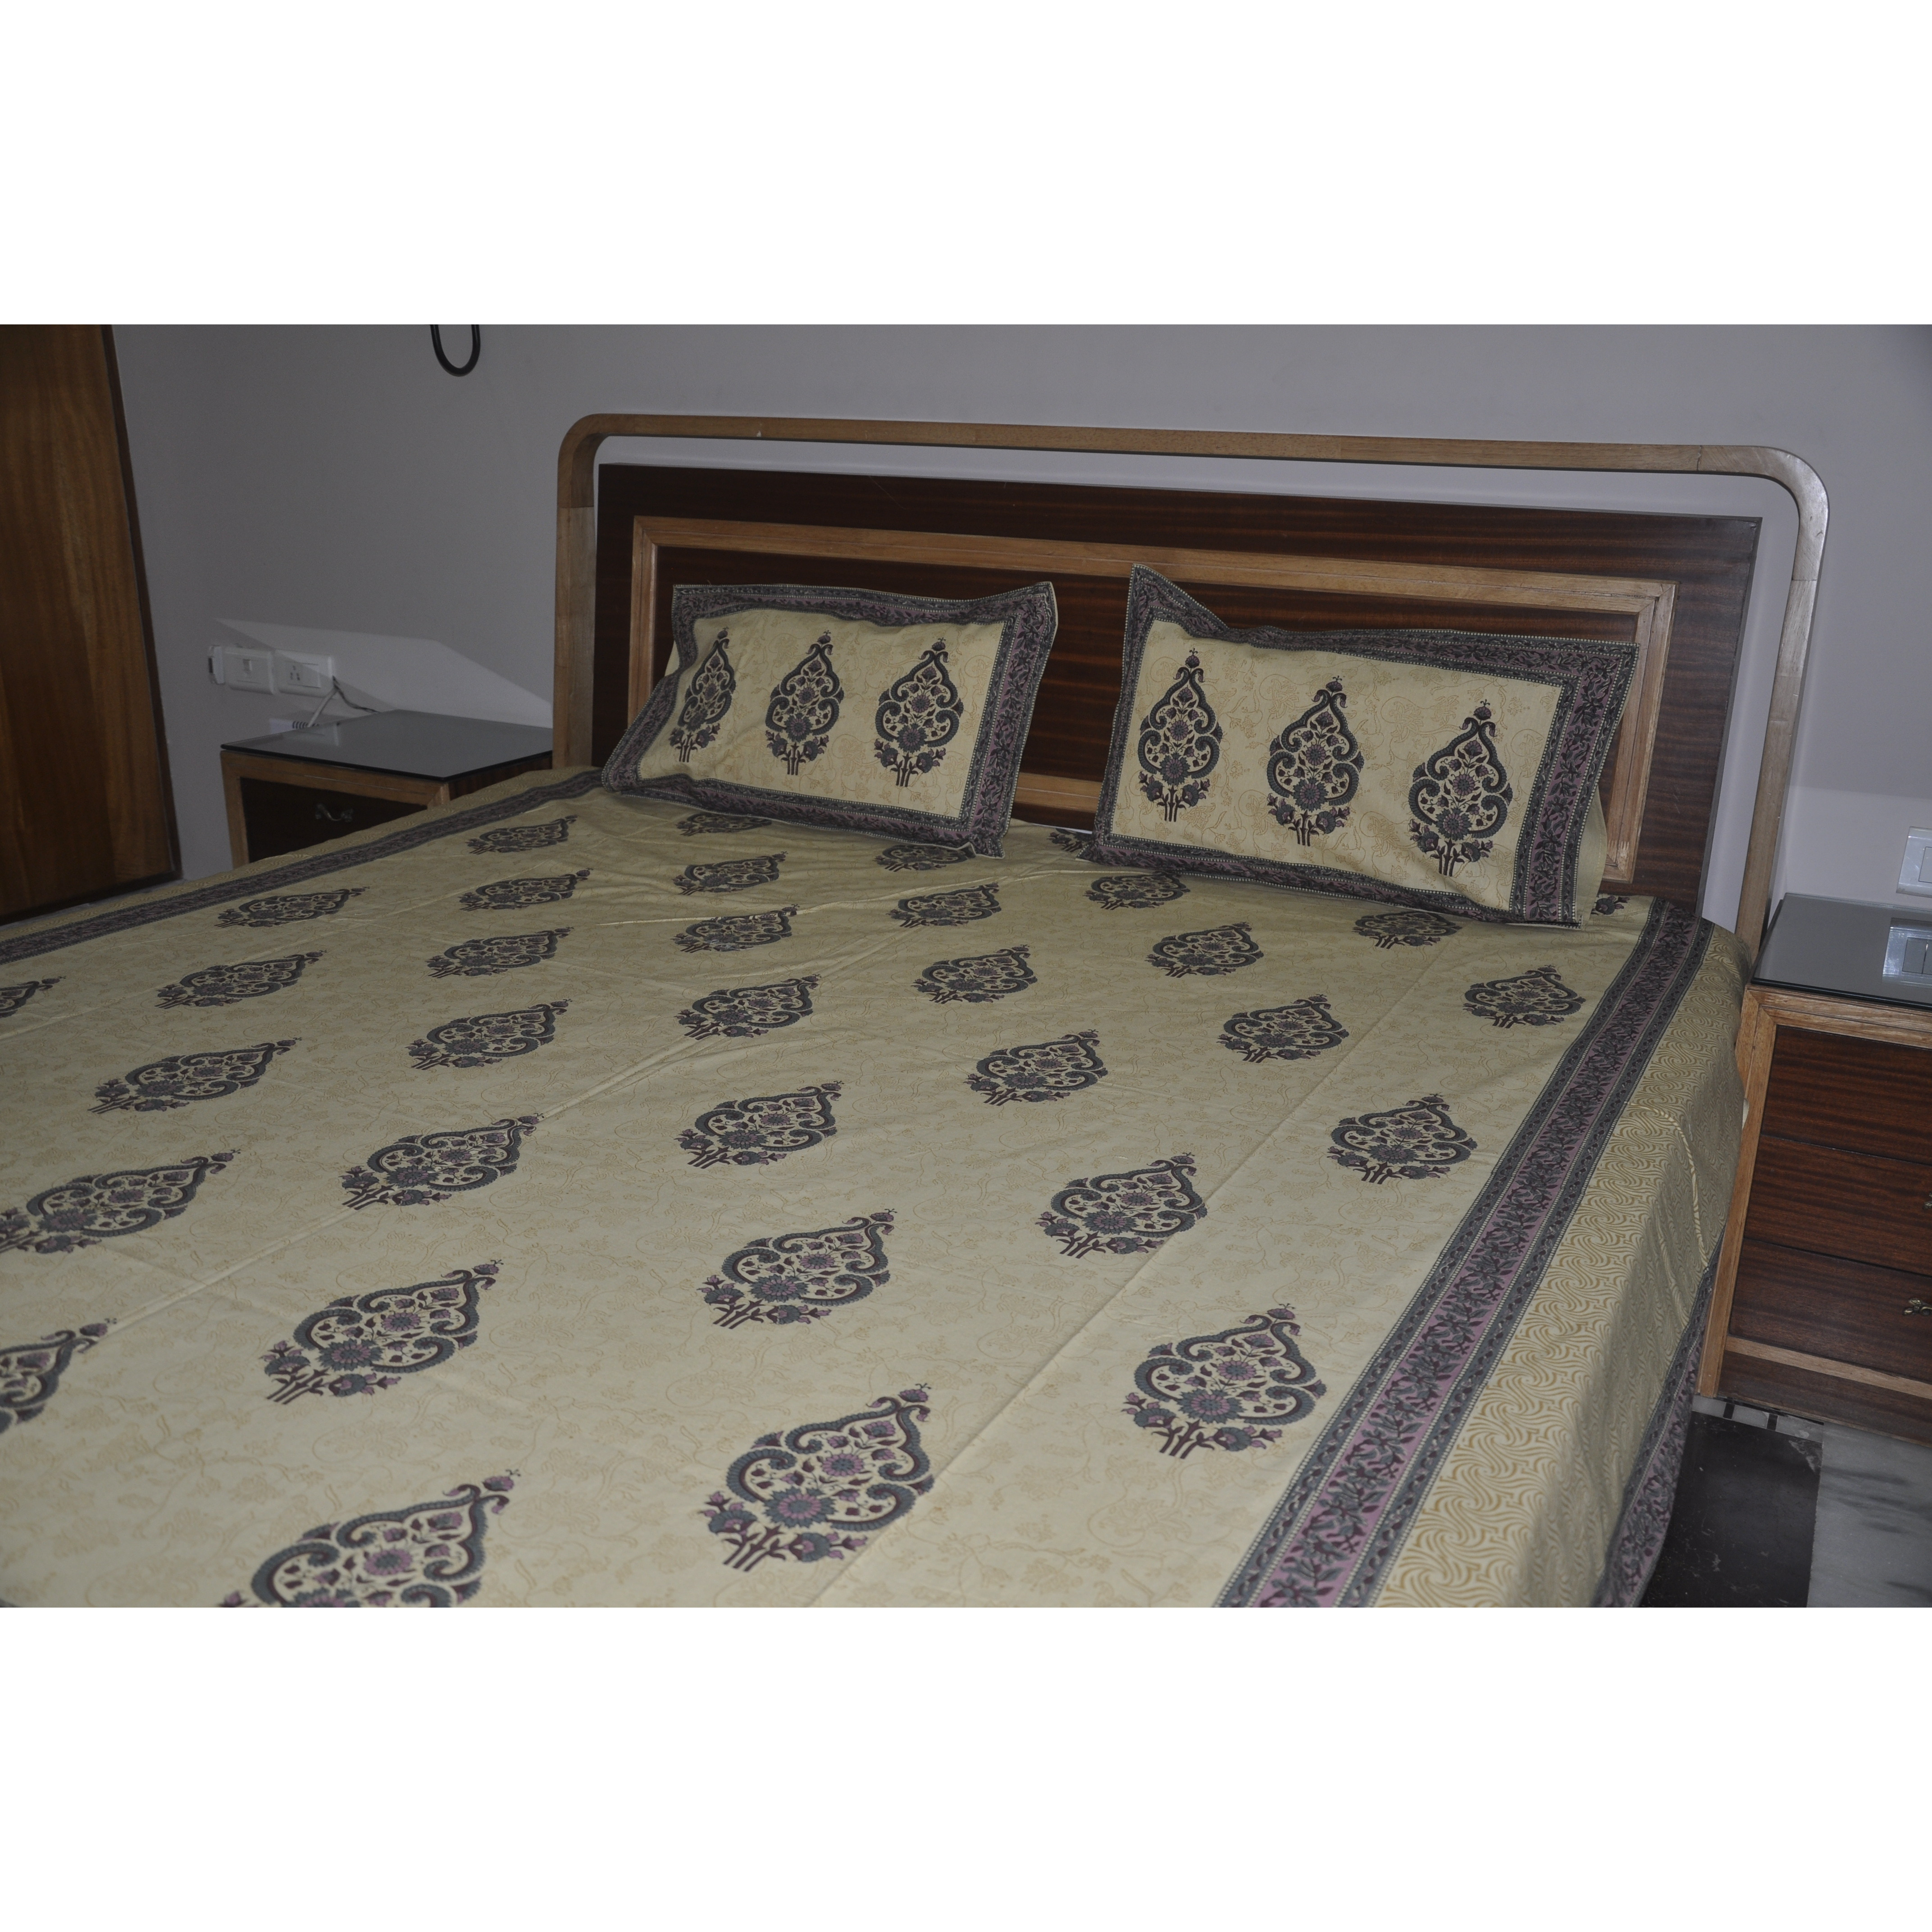 Indian Cotton Pillow Cover Bedding Set Block Printed Beige Bedspreads Bed Sheets